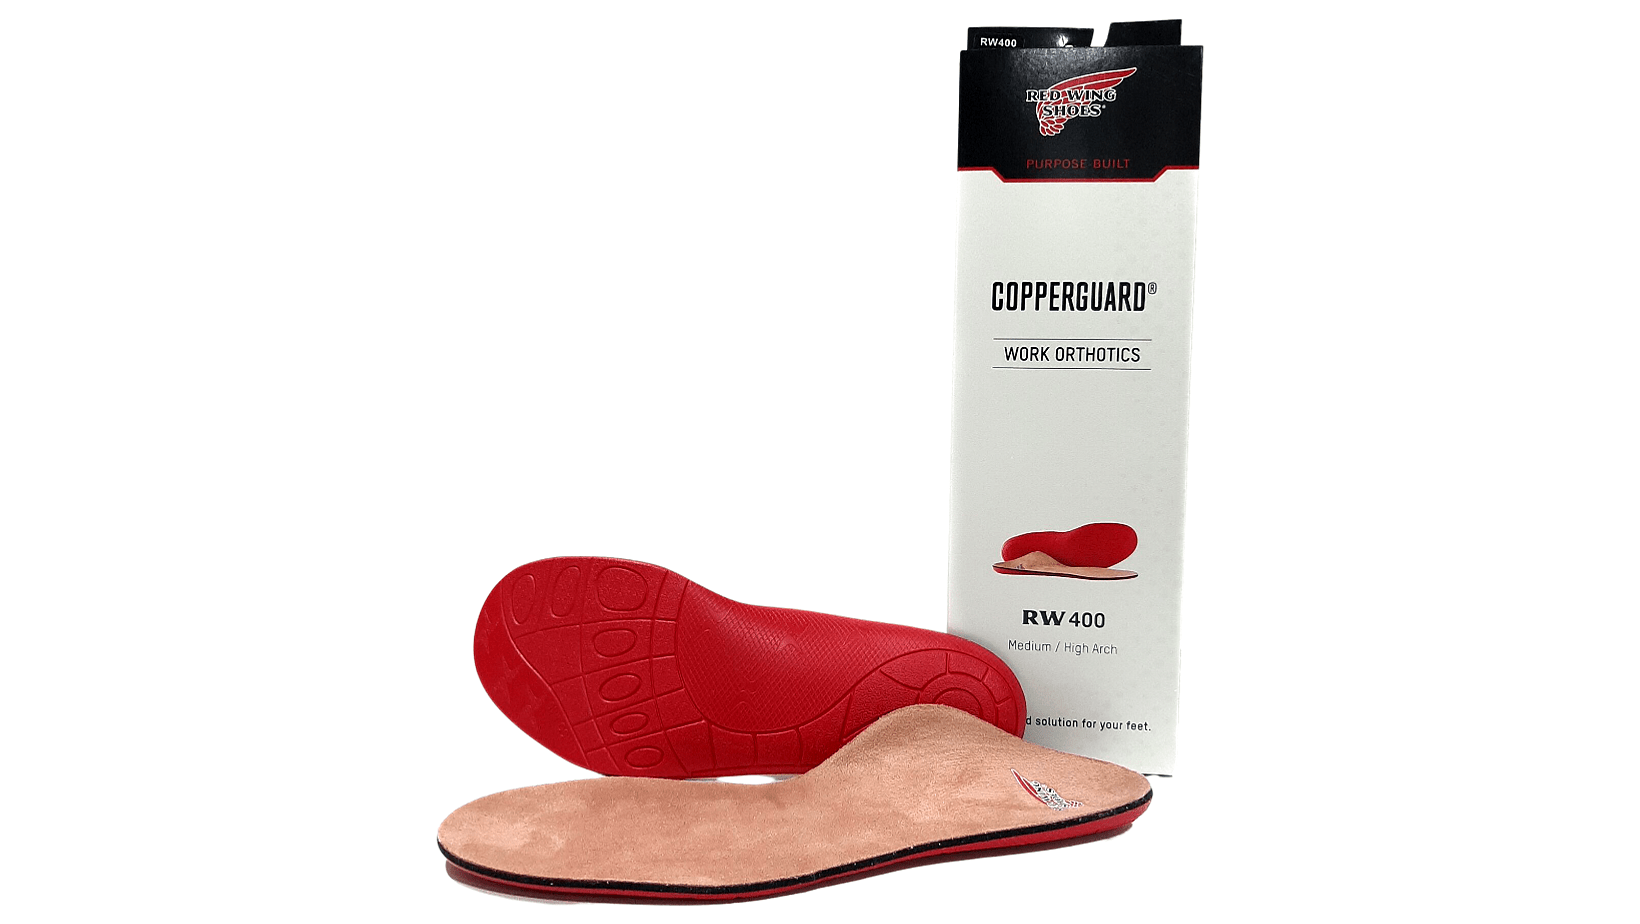 RW2200 Memory Foam Shoe The Most Comfortable Arch, 45% OFF